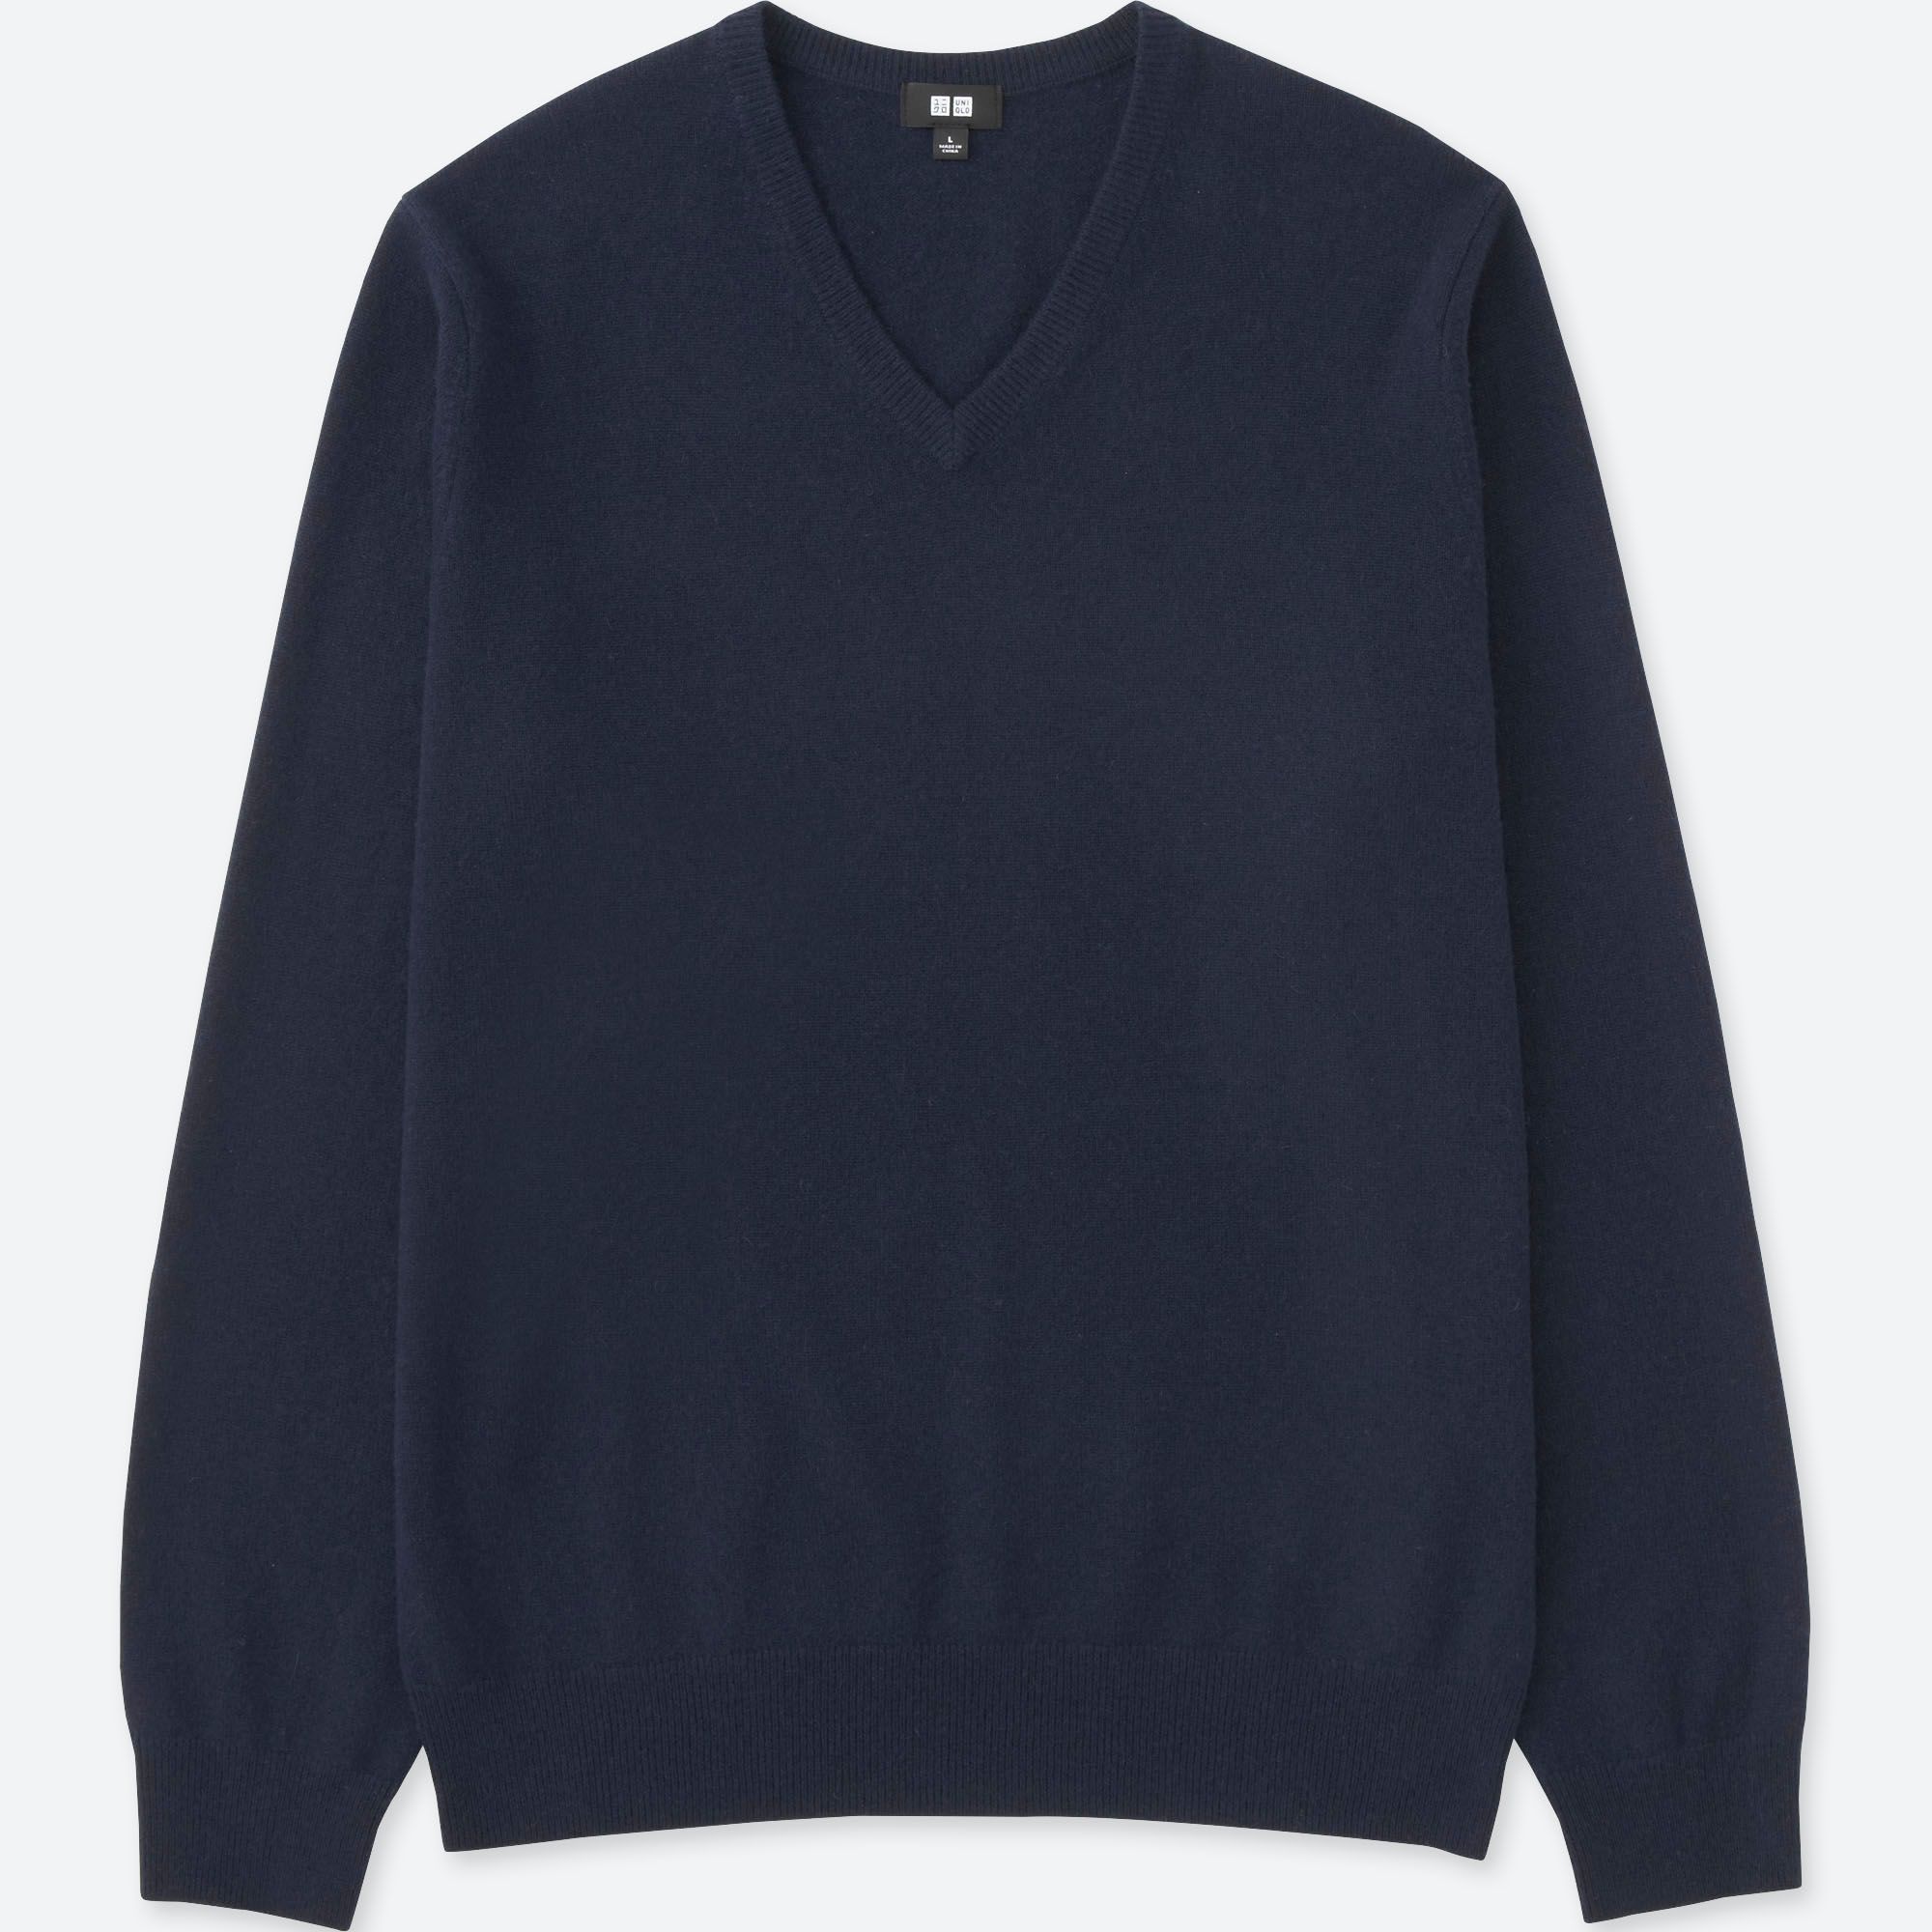 Men's Cashmere Pullovers, Sweaters, Jumpers | UNIQLO UK